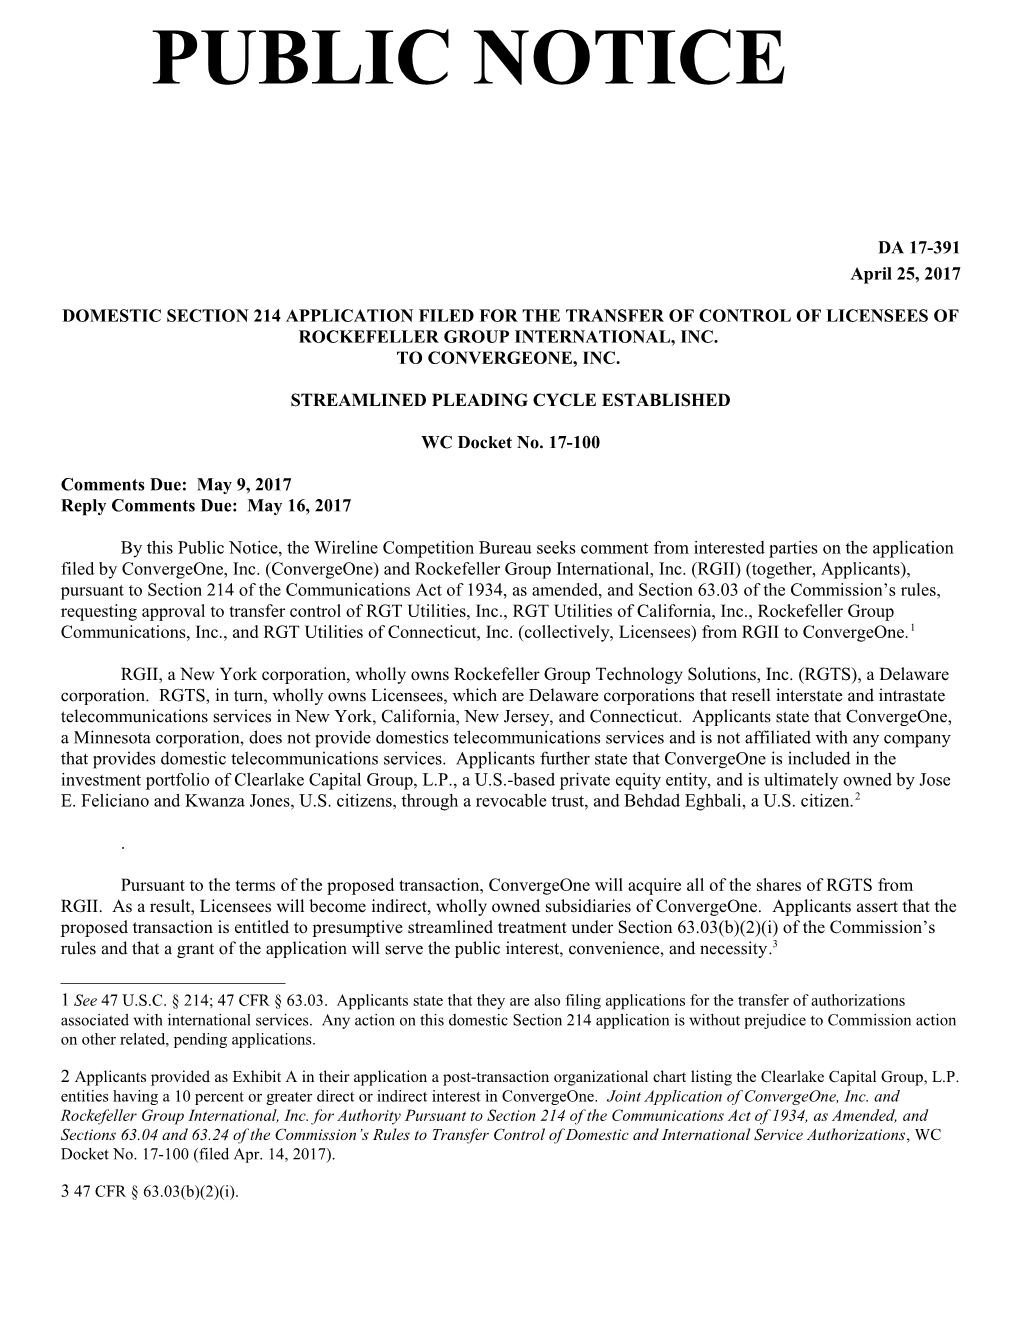 Domestic Section 214 Application Filed for the Transfer of Control of Licensees of Rockefeller